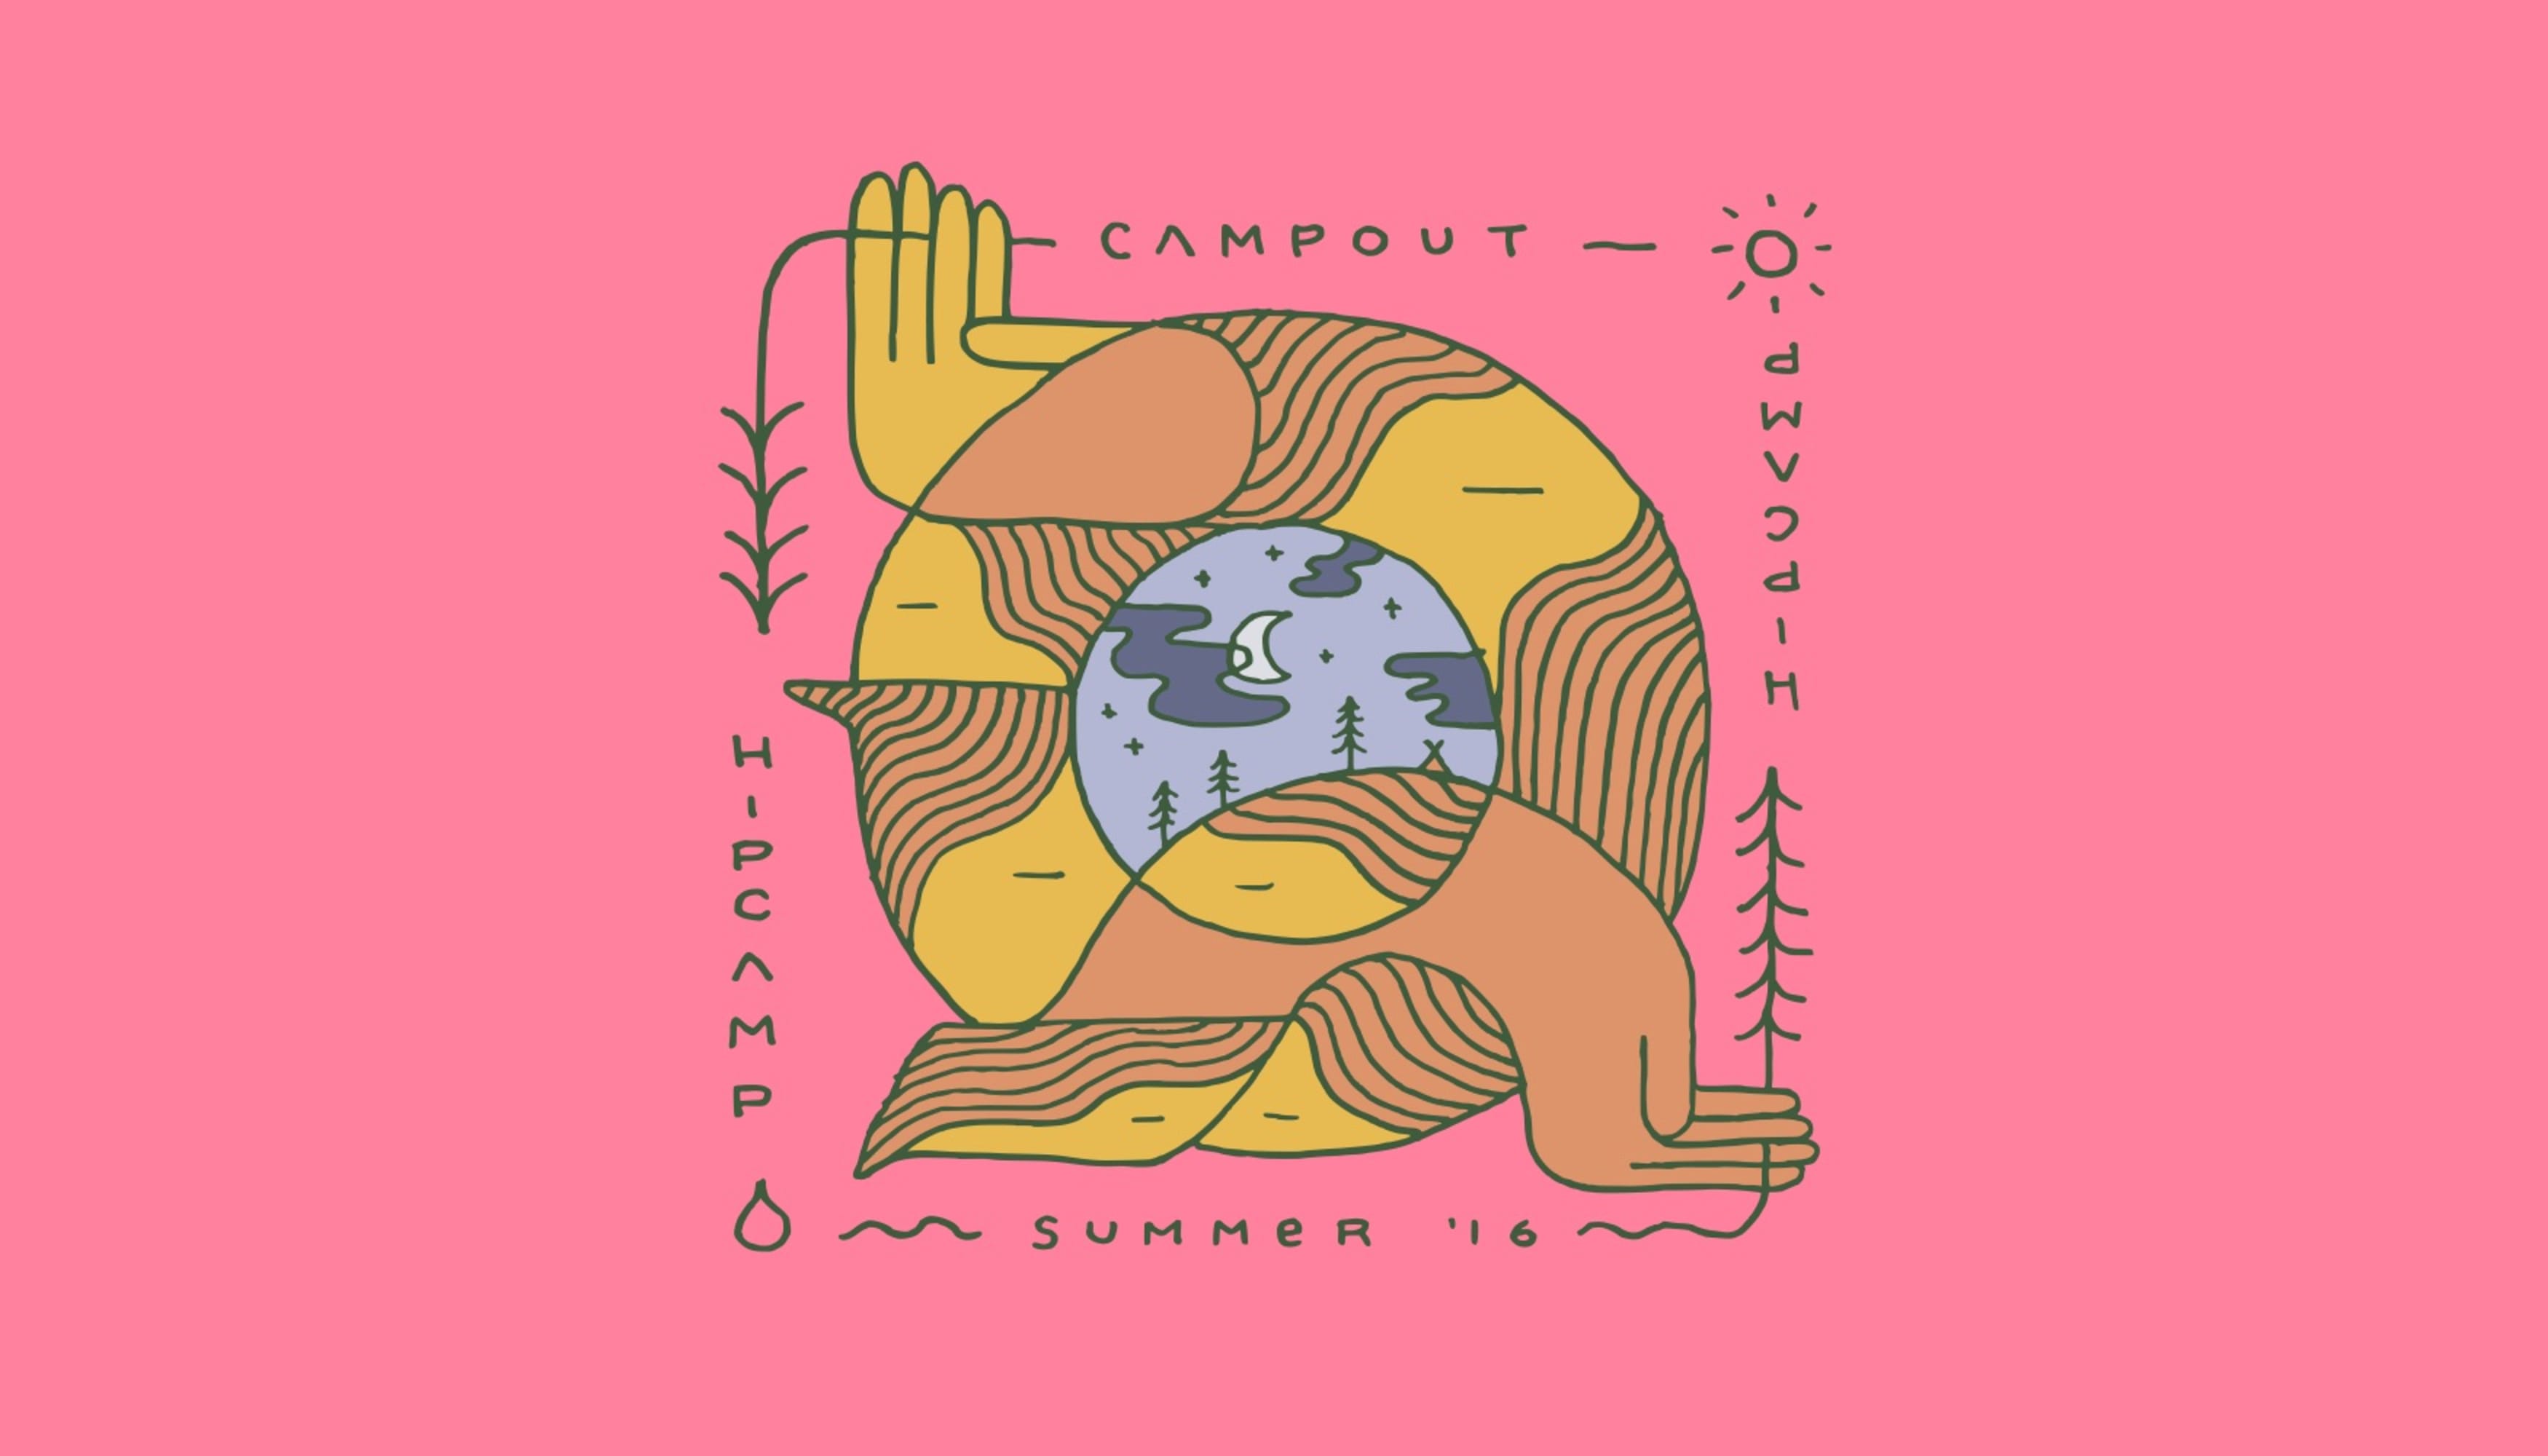 Announcing The Hipcamp Summer Campout Series